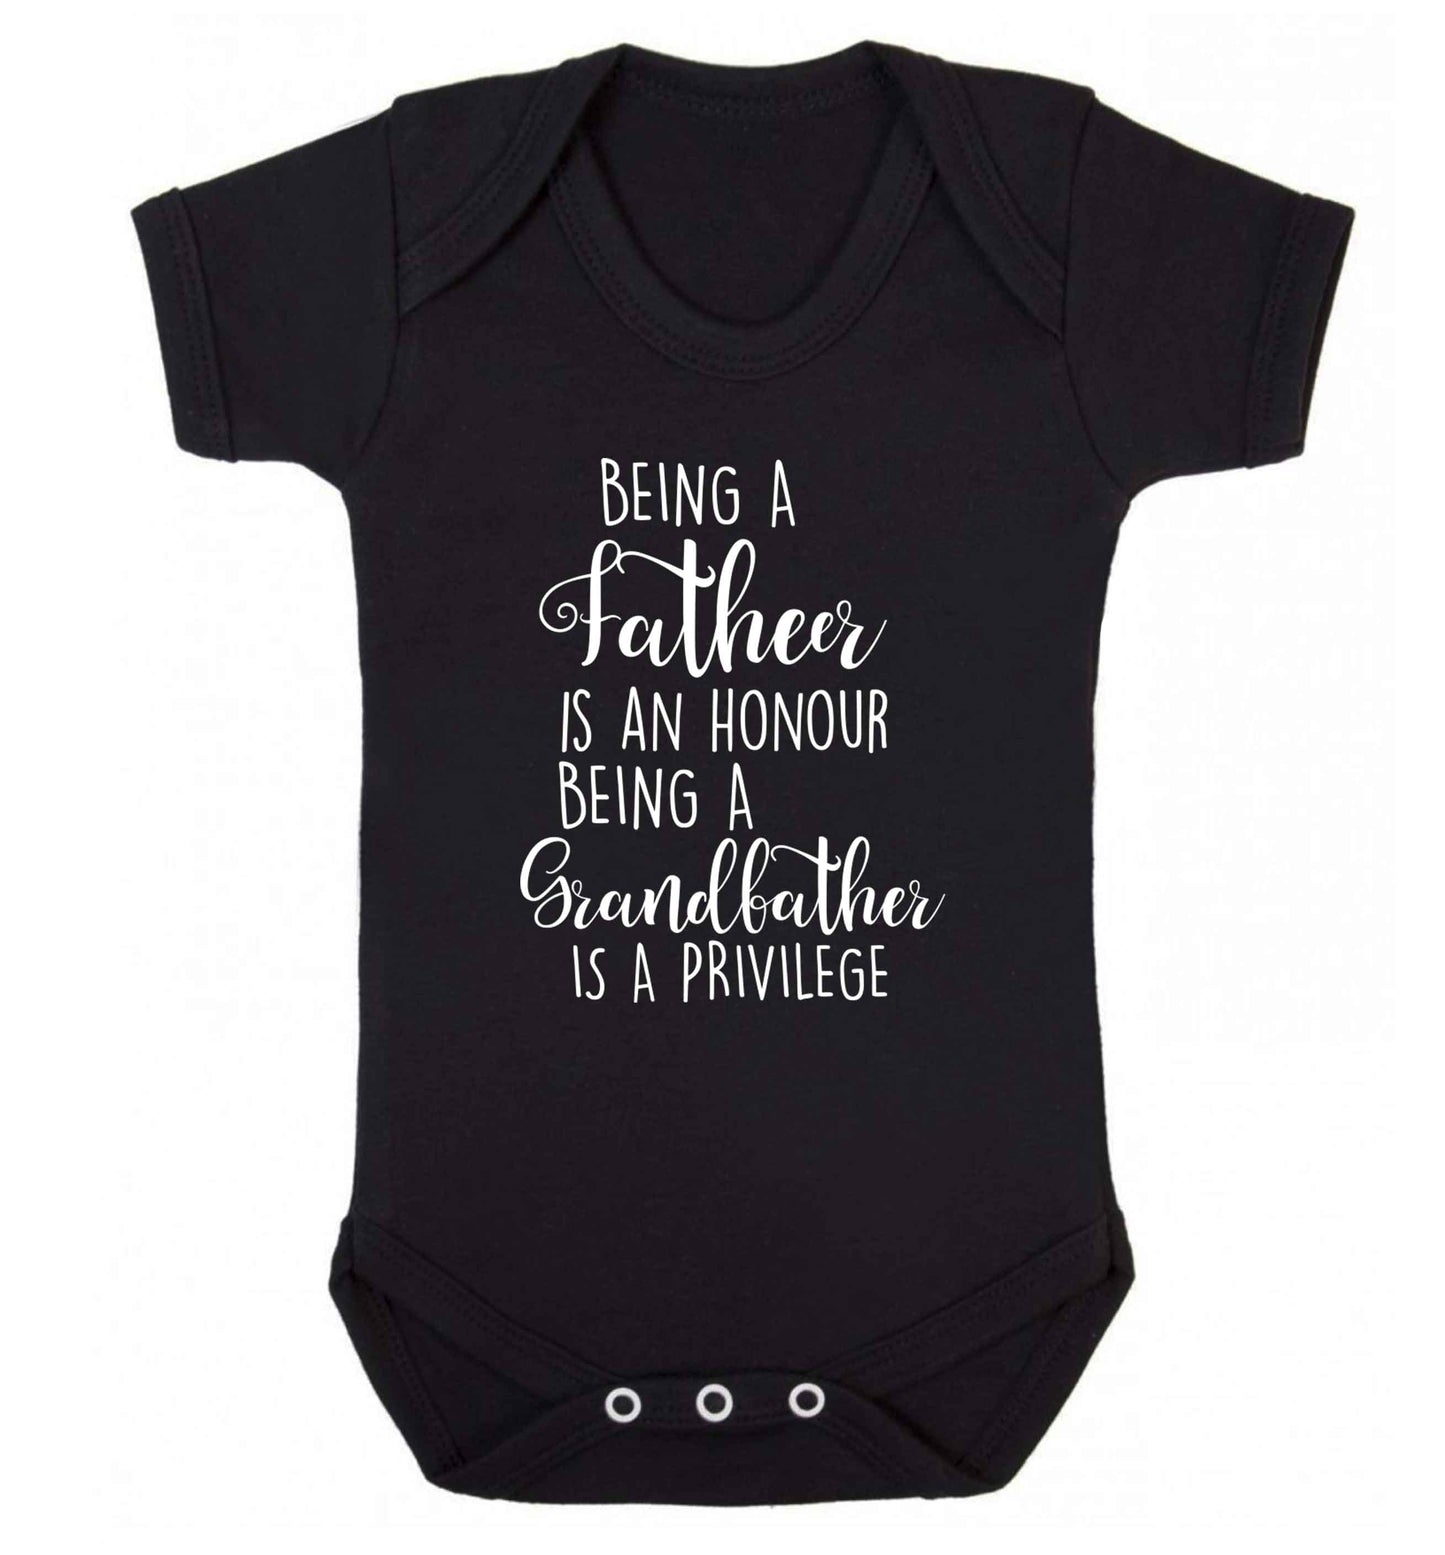 Being a father is an honour being a grandfather is a privilege Baby Vest black 18-24 months